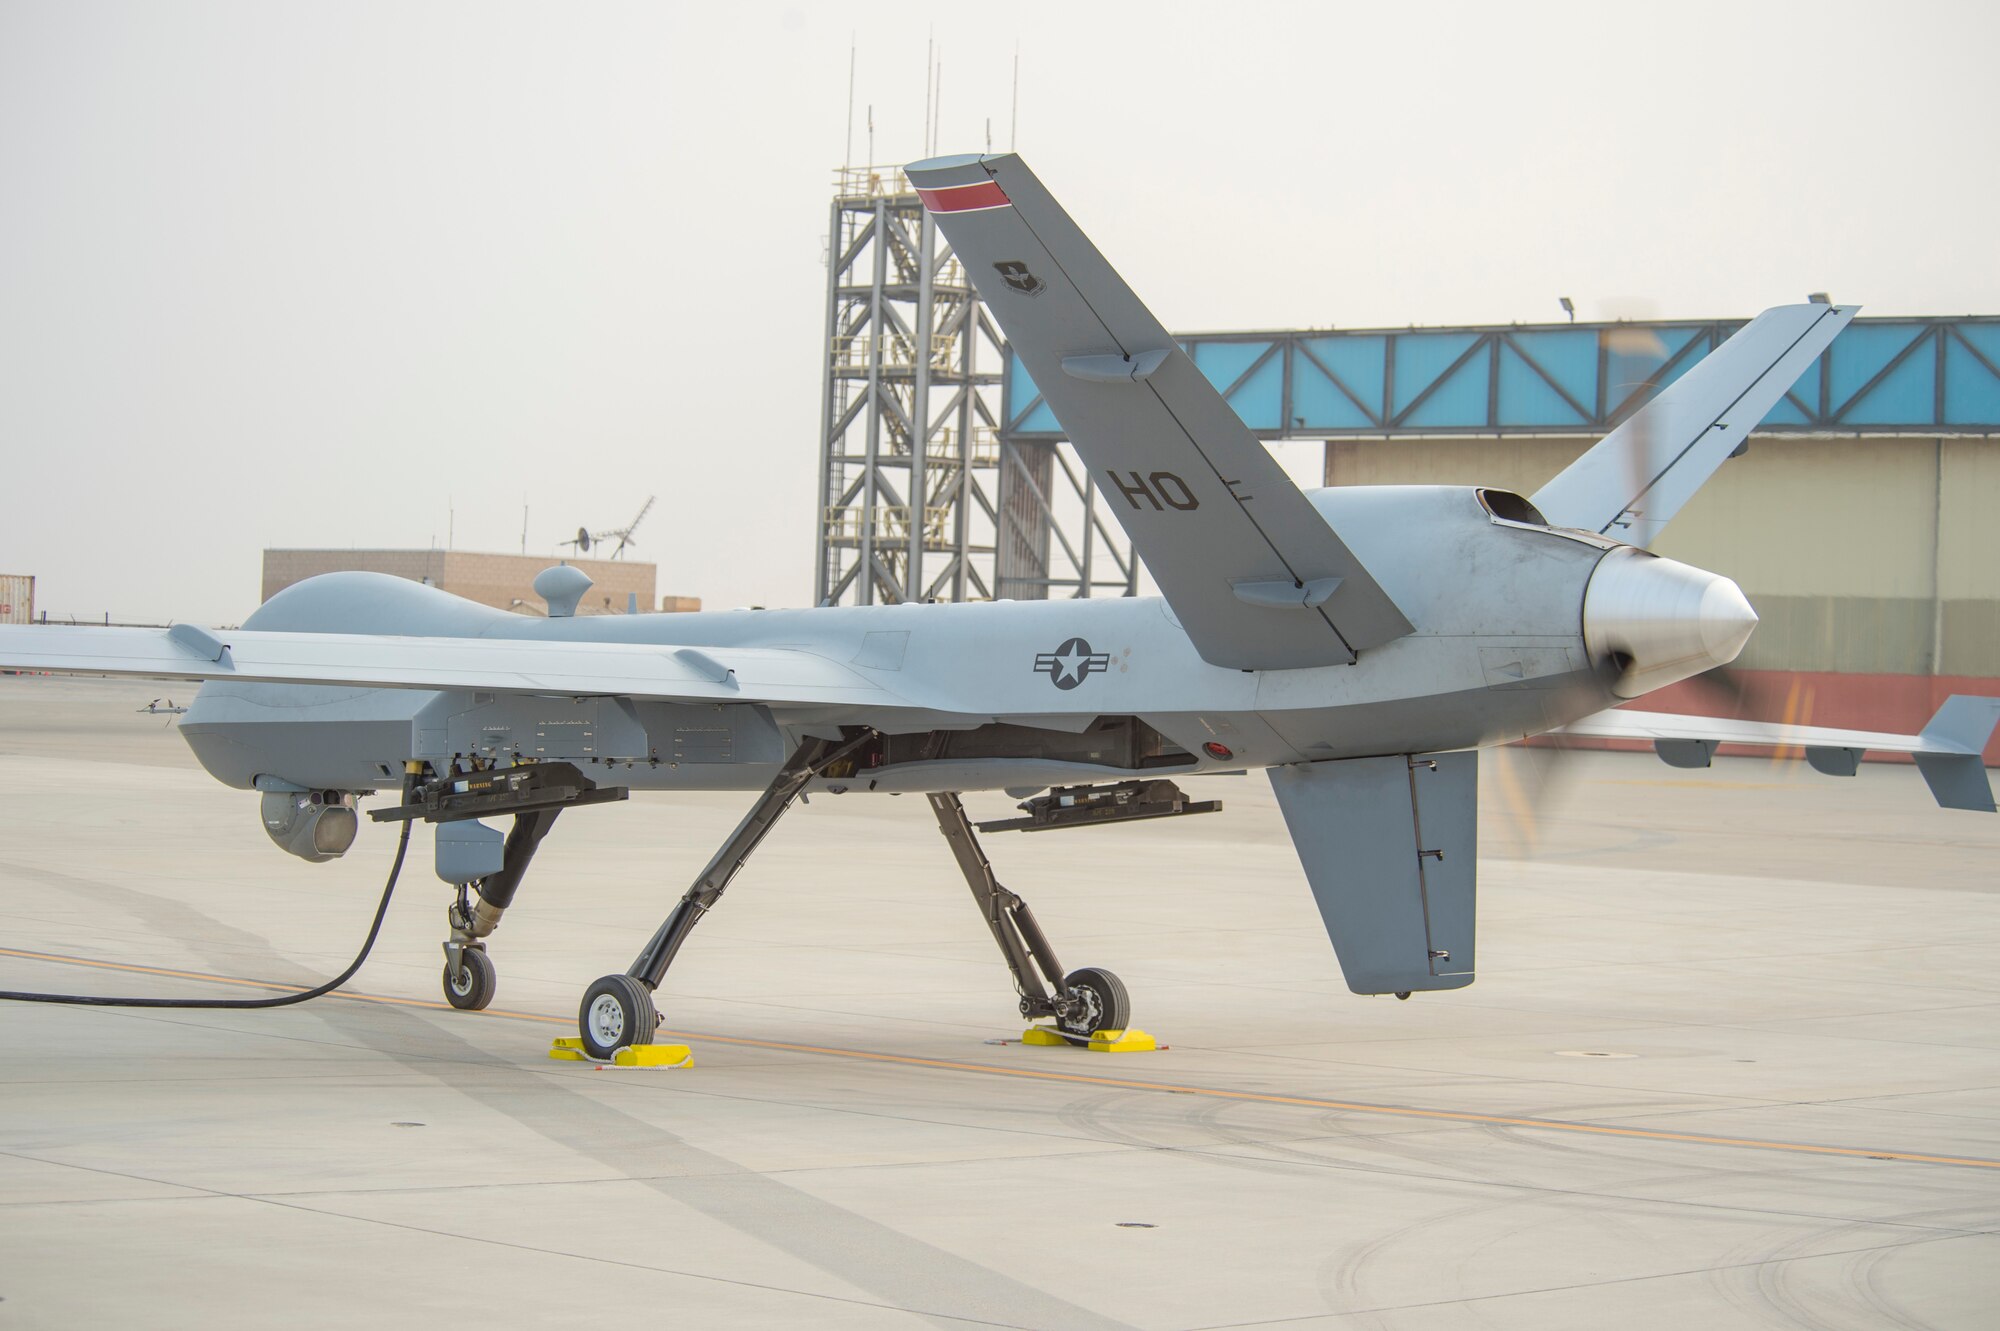 A MQ-9 Reaper sits on the runway pre-flight during Exercise Agile Reaper Sept. 15, 2020, at Naval Air Station Point Mugu, California. The routine training exercise is the first iteration of Agile Reaper and included deployment of three MQ-9s and remote command and control infrastructure. (U.S. Air Force photo by Senior Airman Collette Brooks)